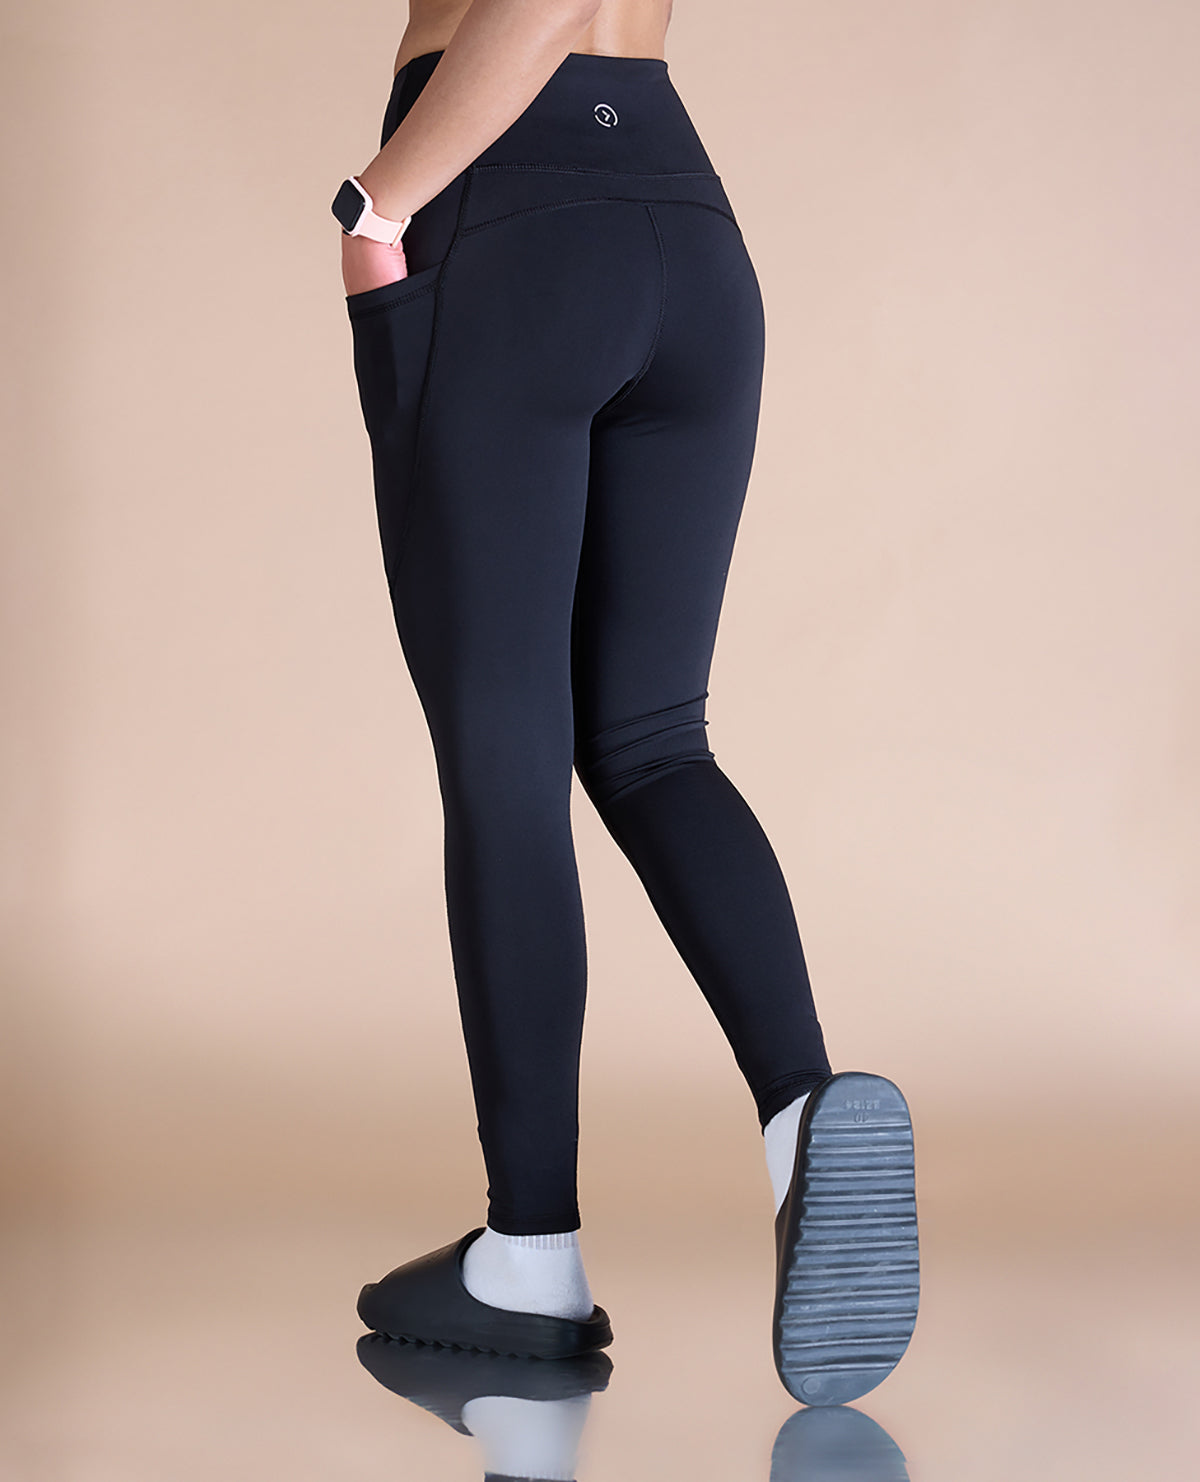 Pockets – Fabric Essential Active 2 Signature in Leggings Second Waisted Skin High Kica SKN with Black